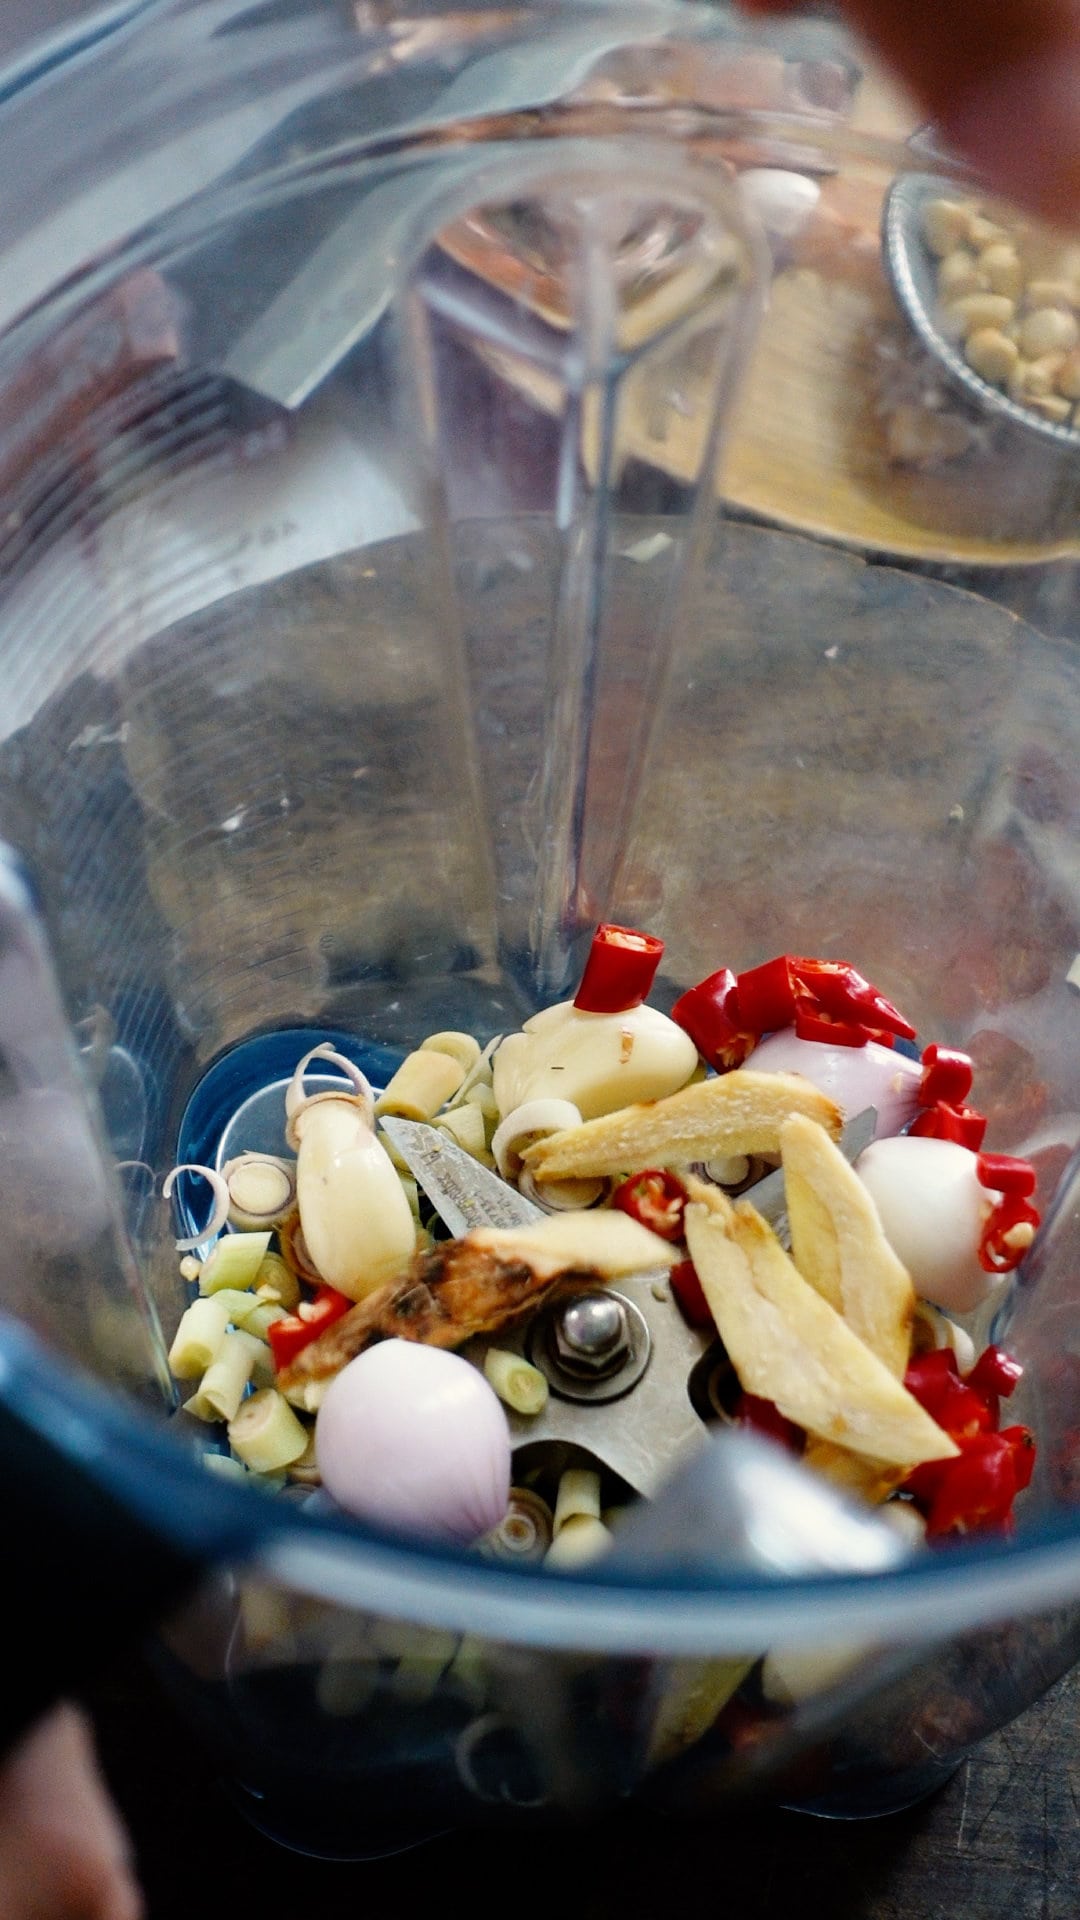 Add chopped ingredients to a blender